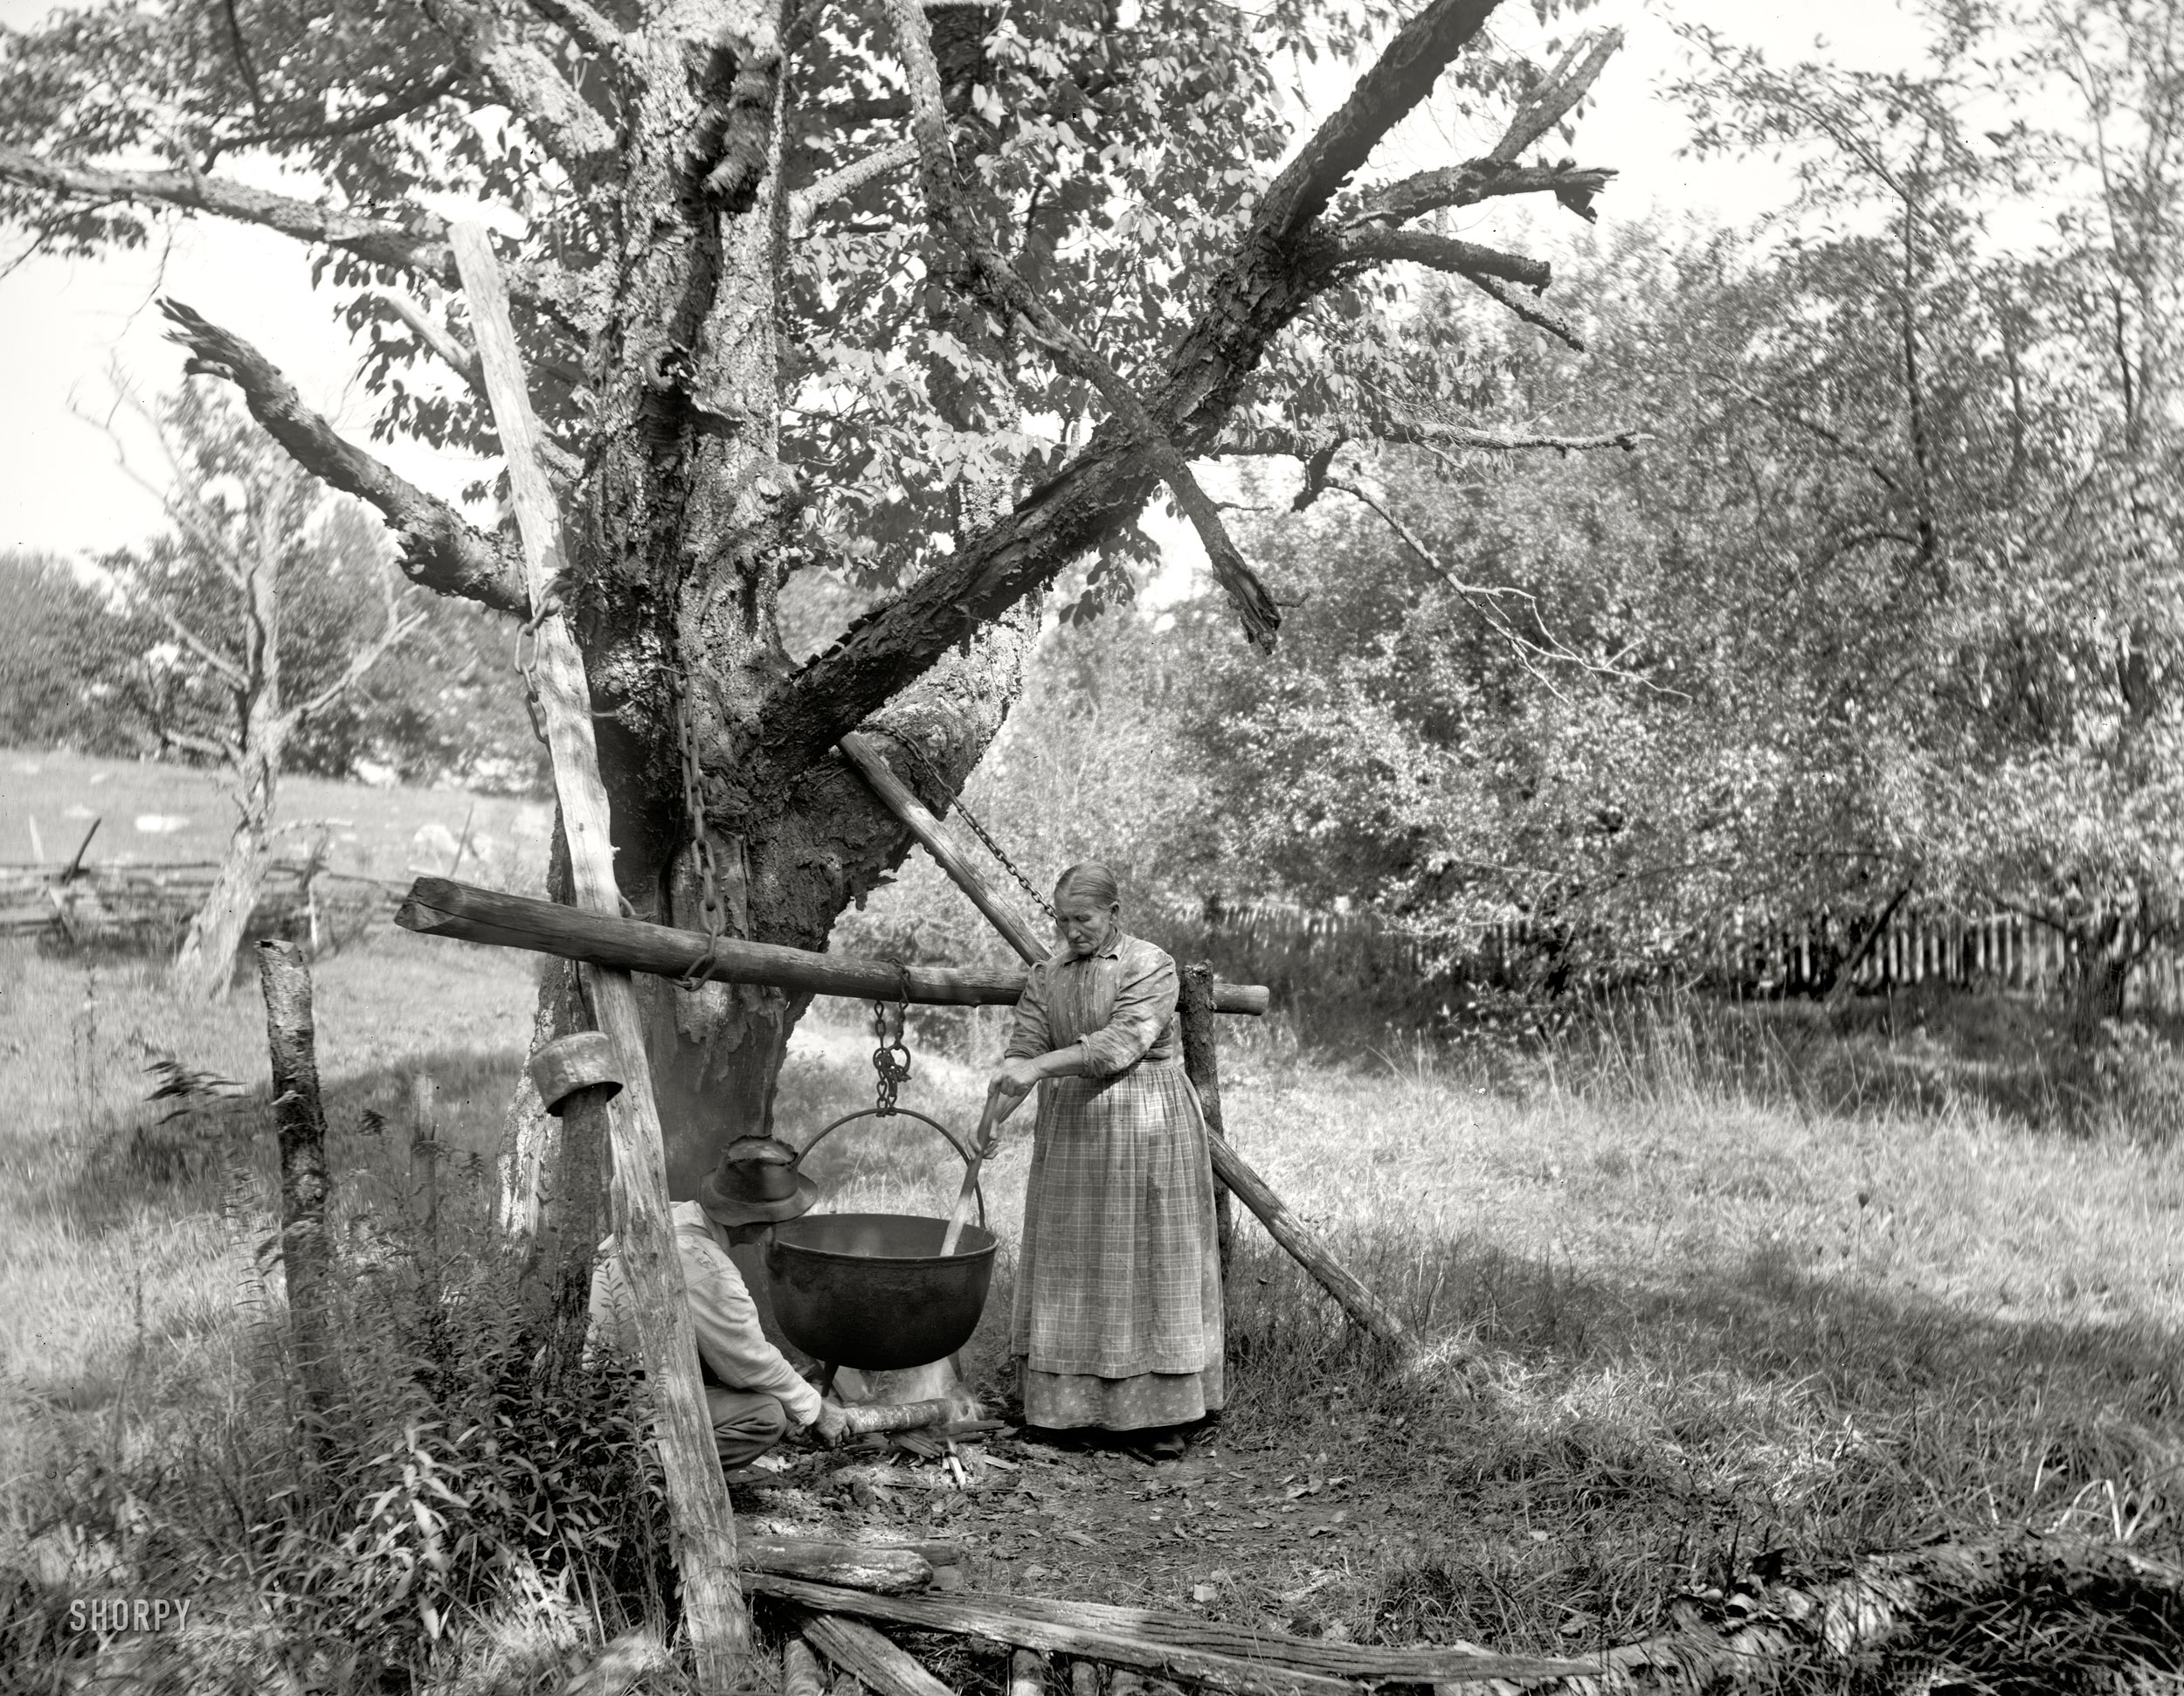 Circa 1900. "A bit of country life near Henryville, Pennsylvania -- making soap." 8x10 inch dry plate glass negative, Detroit Publishing Company. View full size.